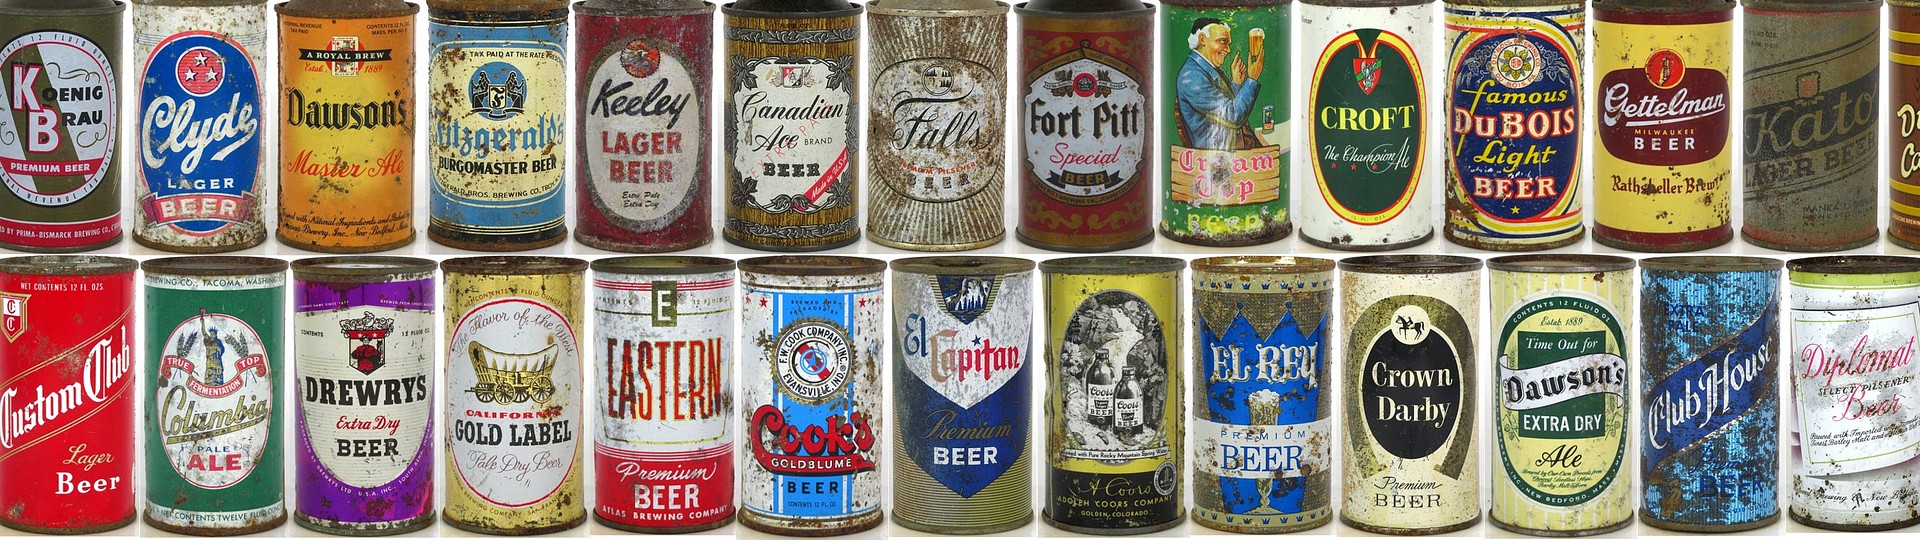 TavernTrove's 2-Day ¡Dumper Fiesta! Vintage Beer Can Auction Day 2 by TavernTrove